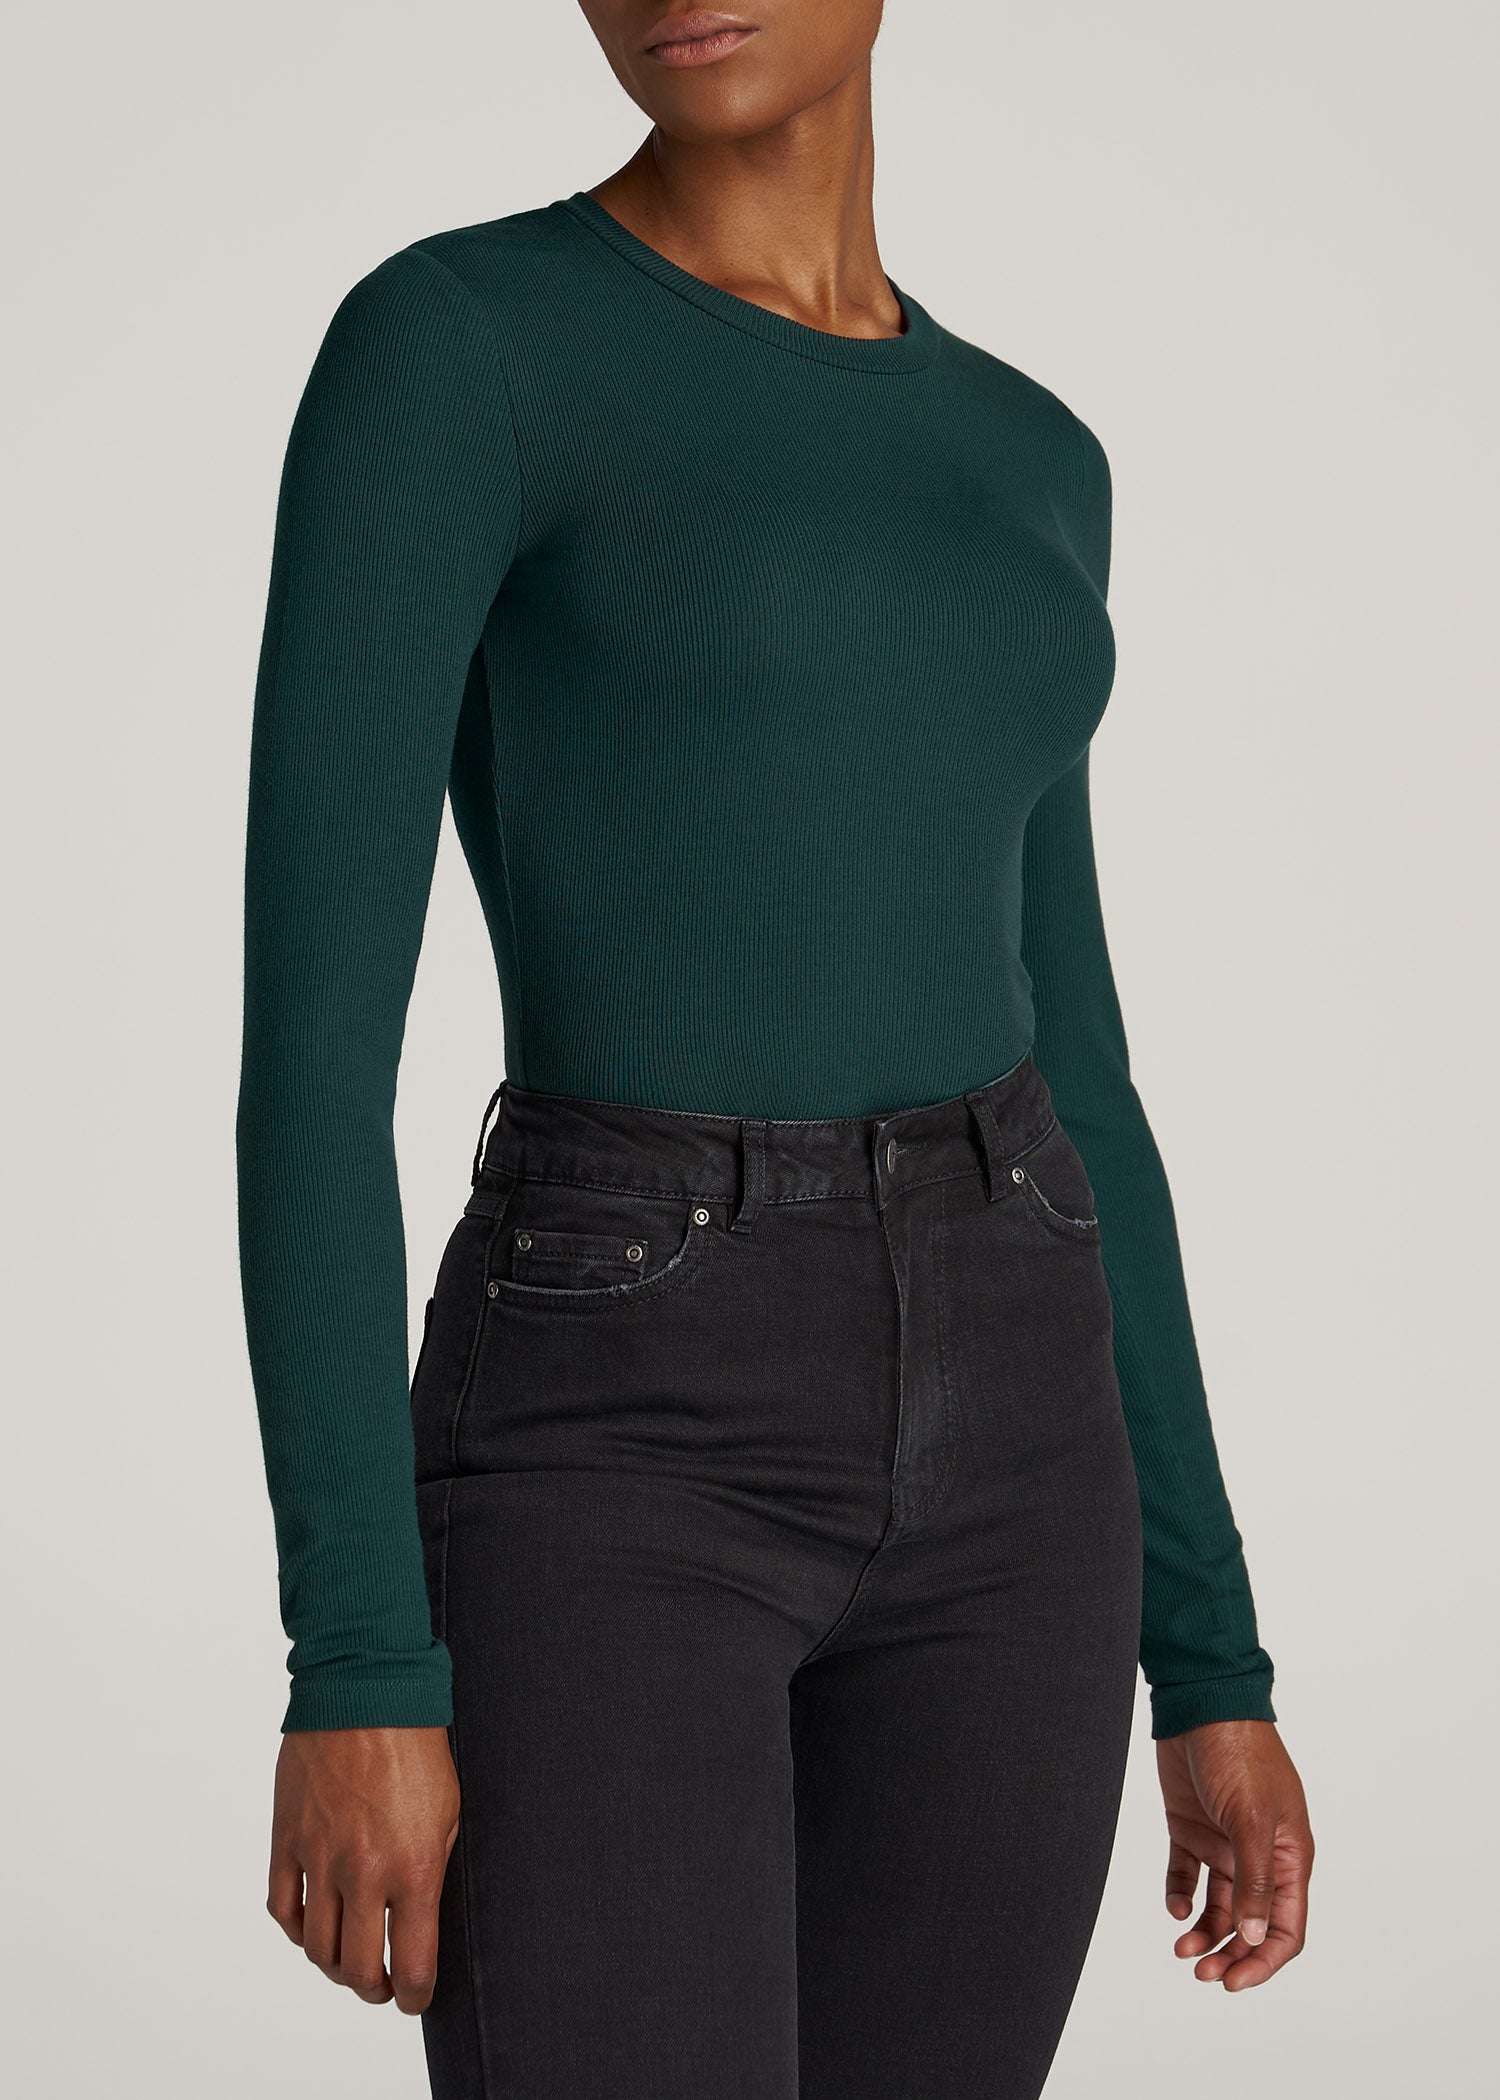 FITTED Ribbed Long Sleeve Tee in Emerald - Tall Women's Shirts